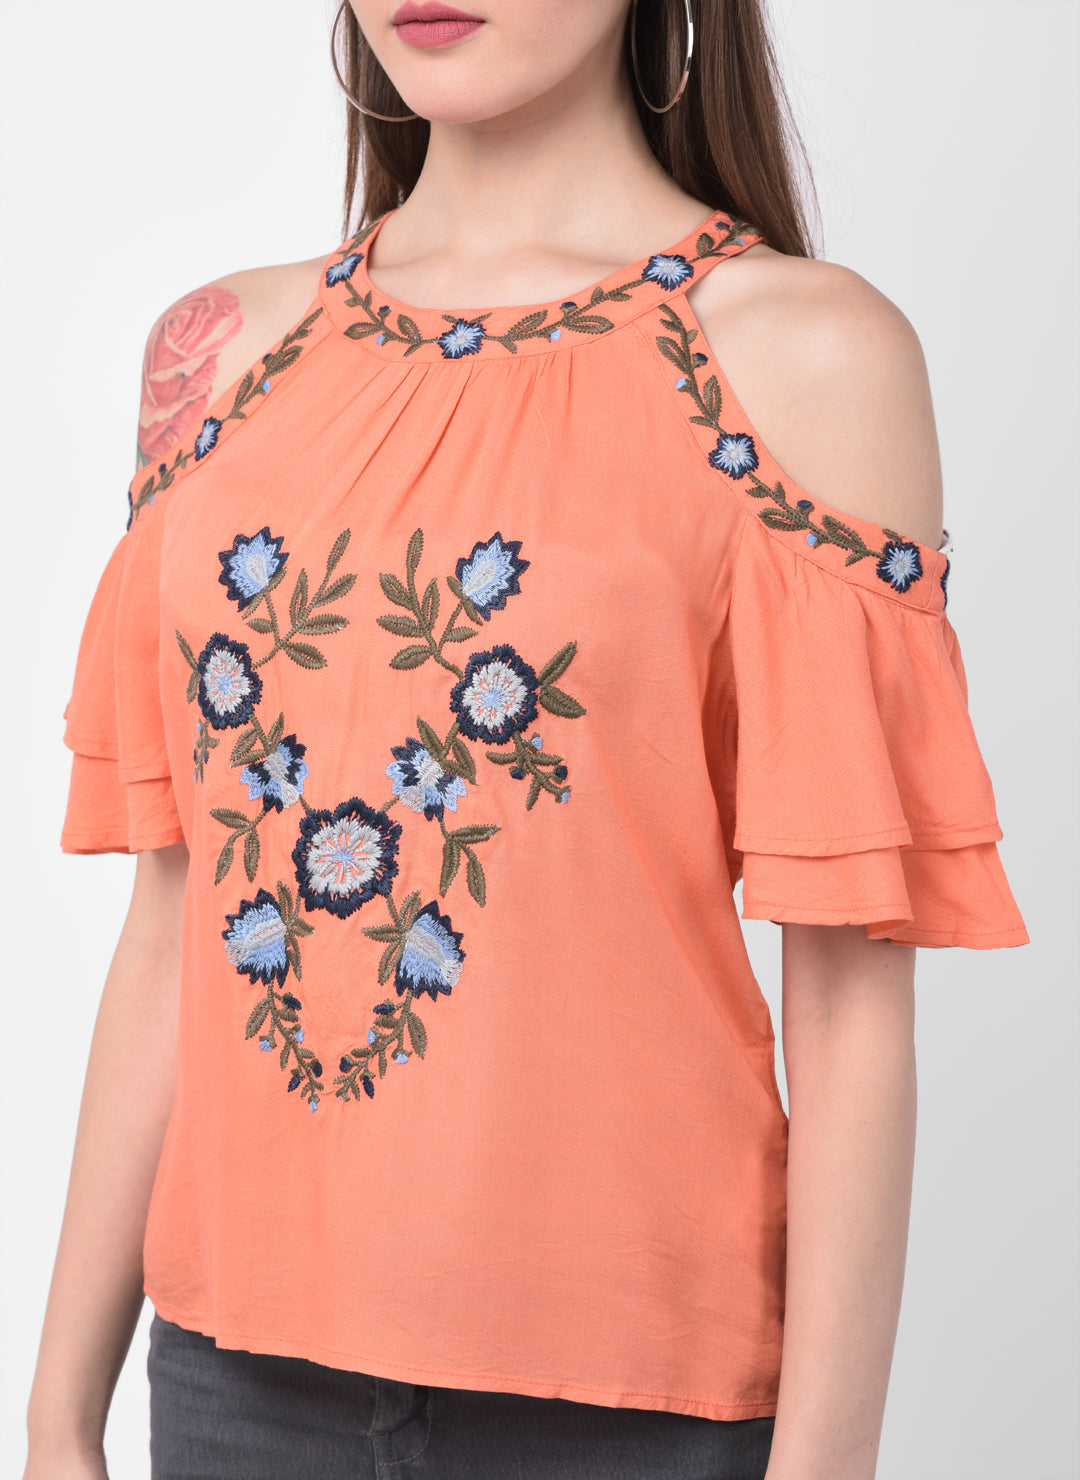 Rayon Blouse With Embroidery